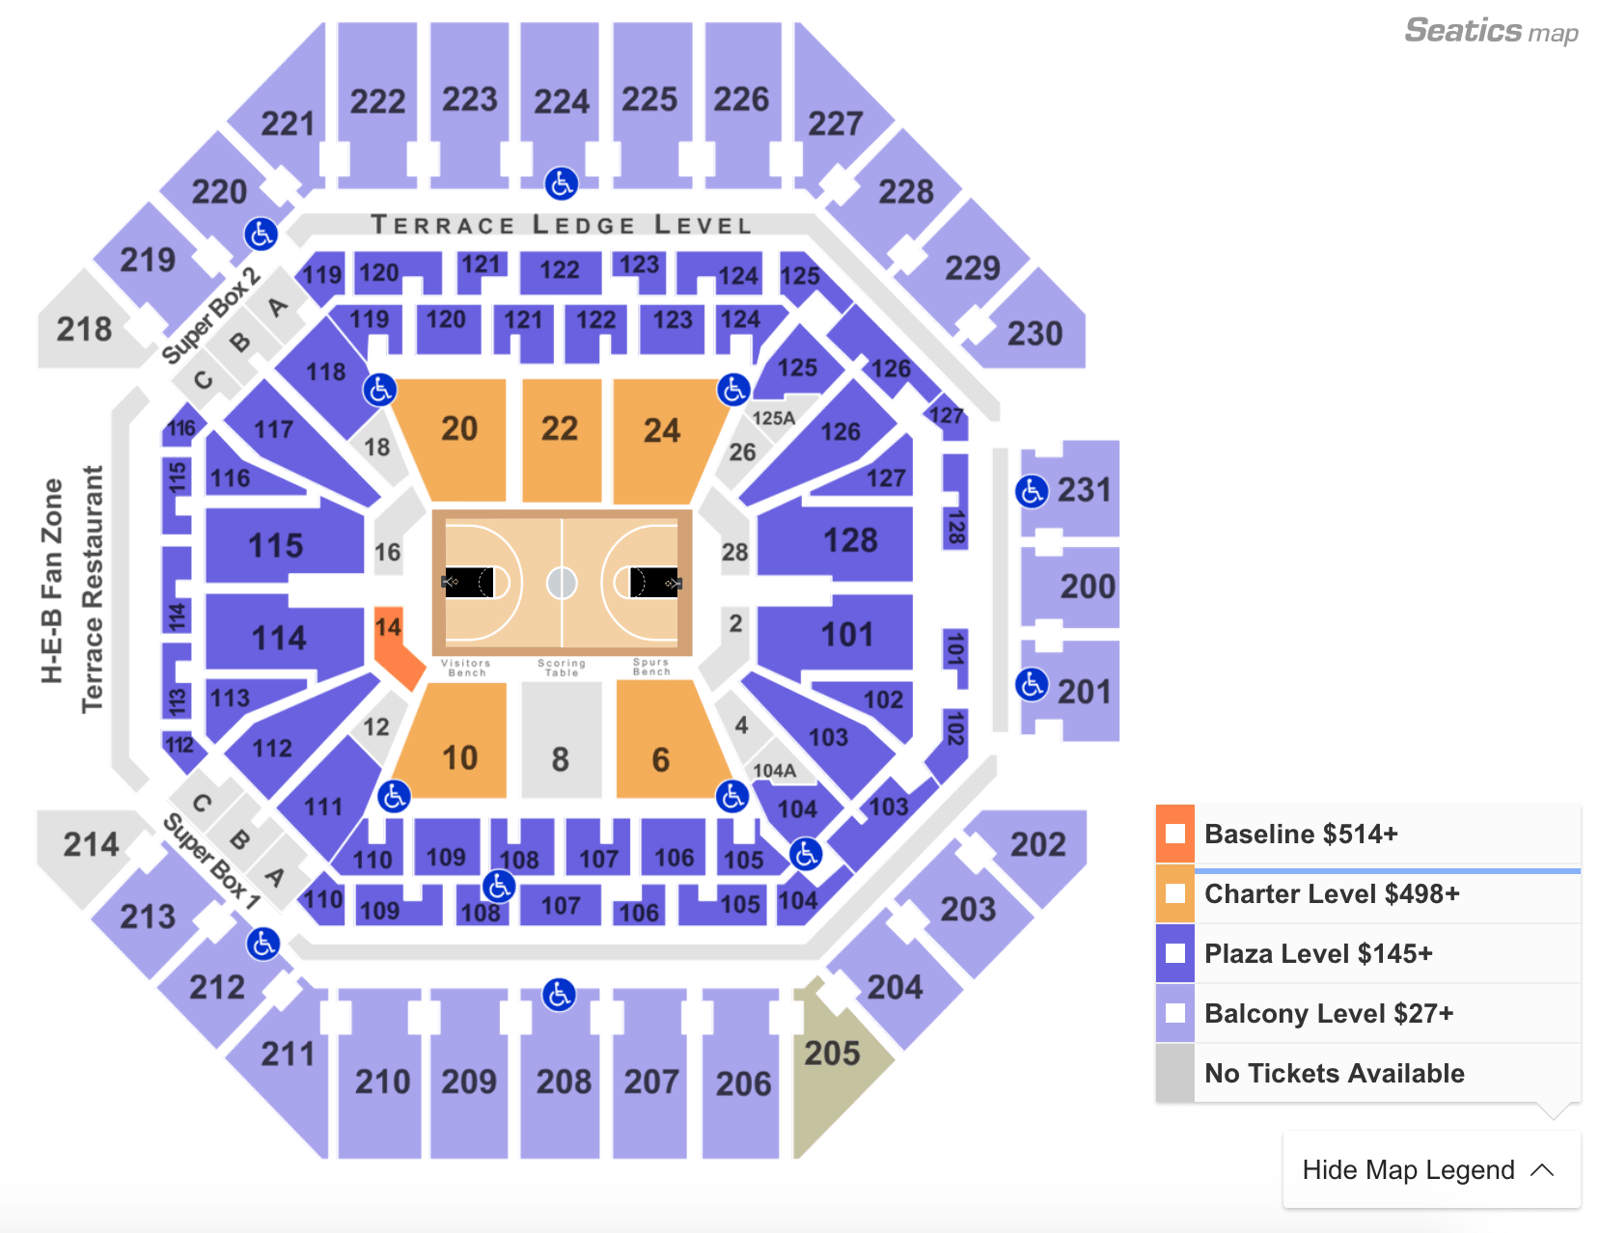 How To Find The Cheapest San Antonio Spurs Tickets + Face Value Options